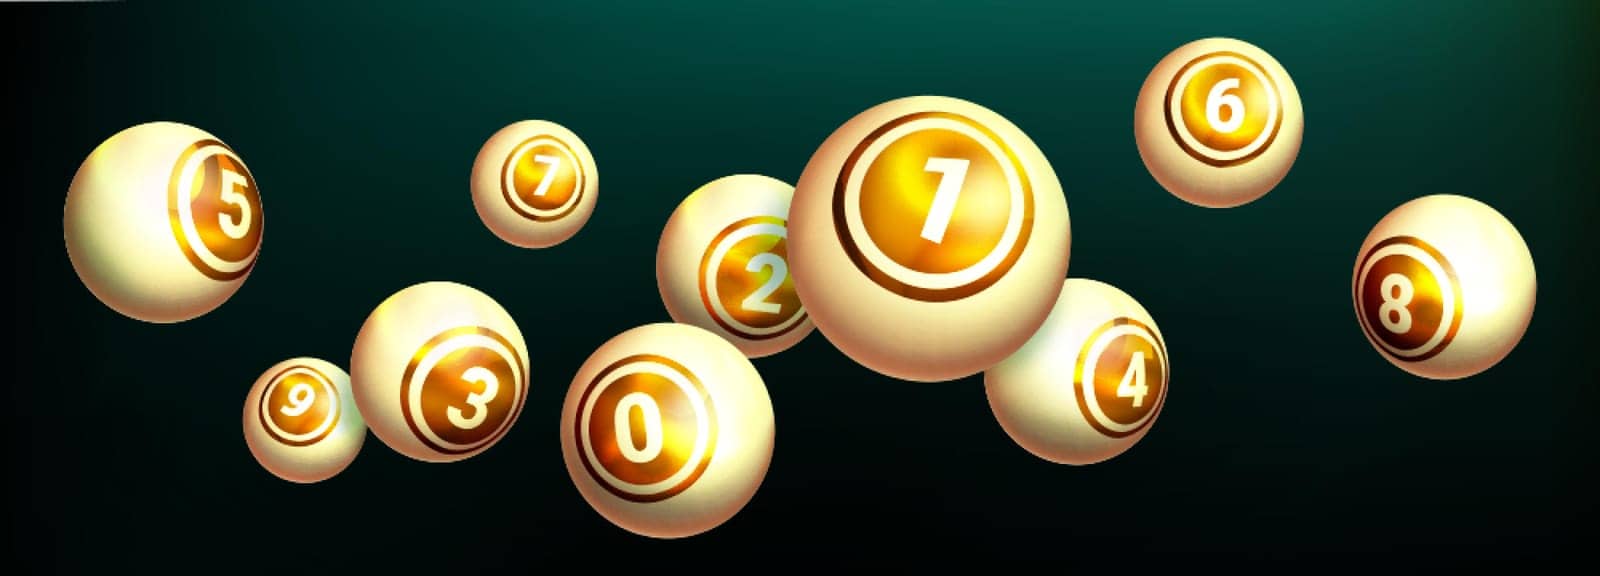 Realistic glossy golden balls with numbers by Redgreystock